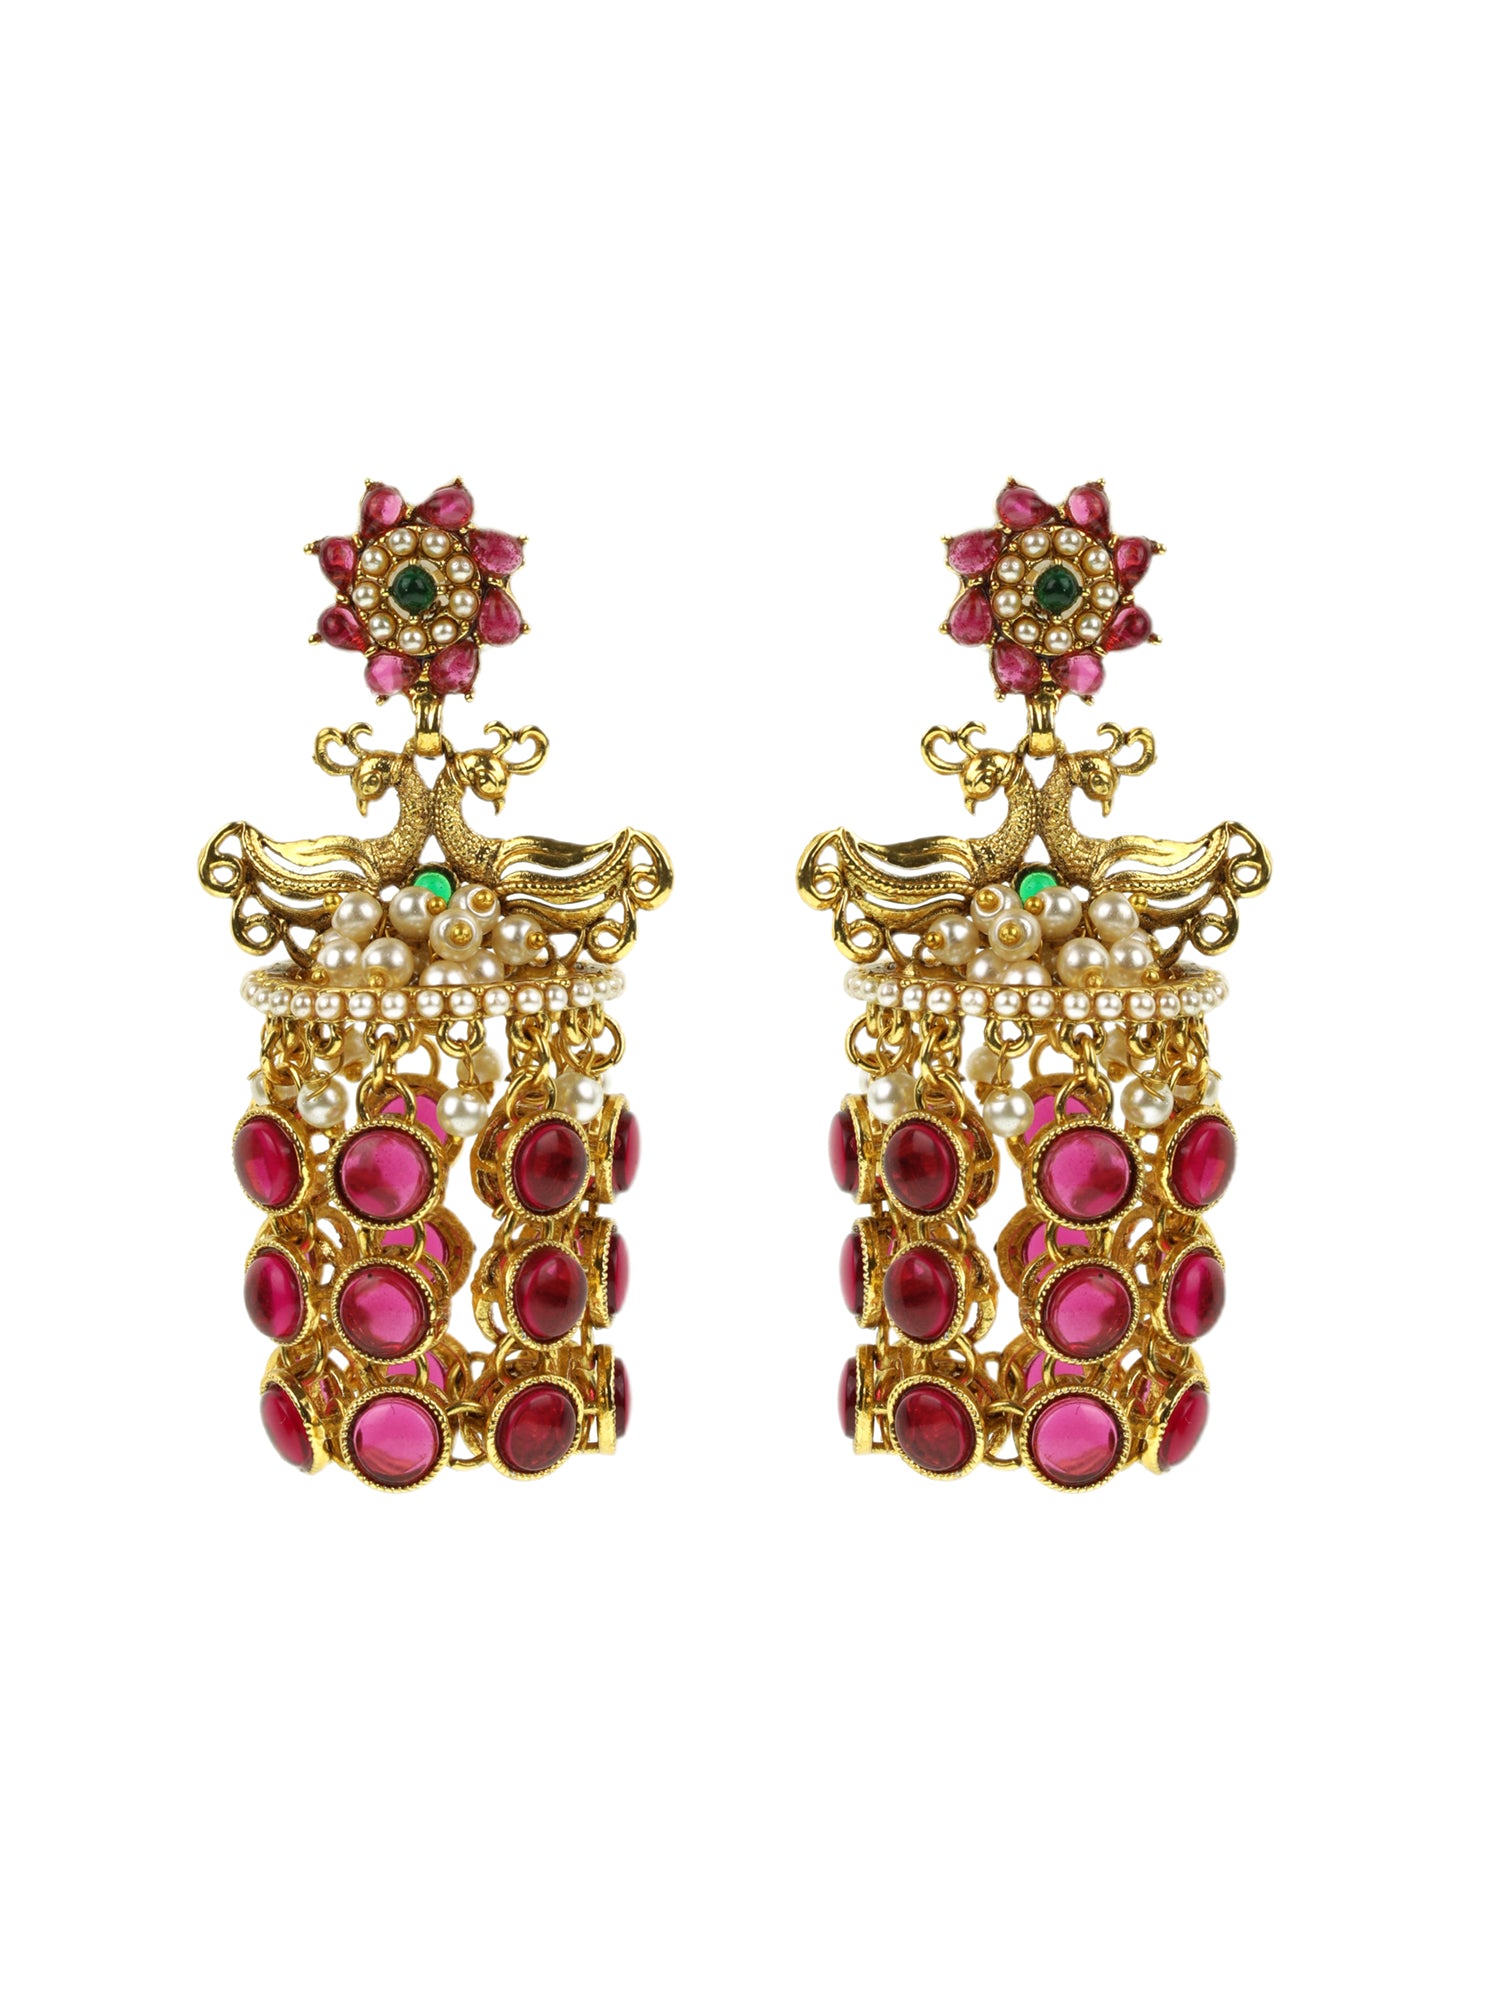 Ruby studded and beaded Peacock shaped Earring